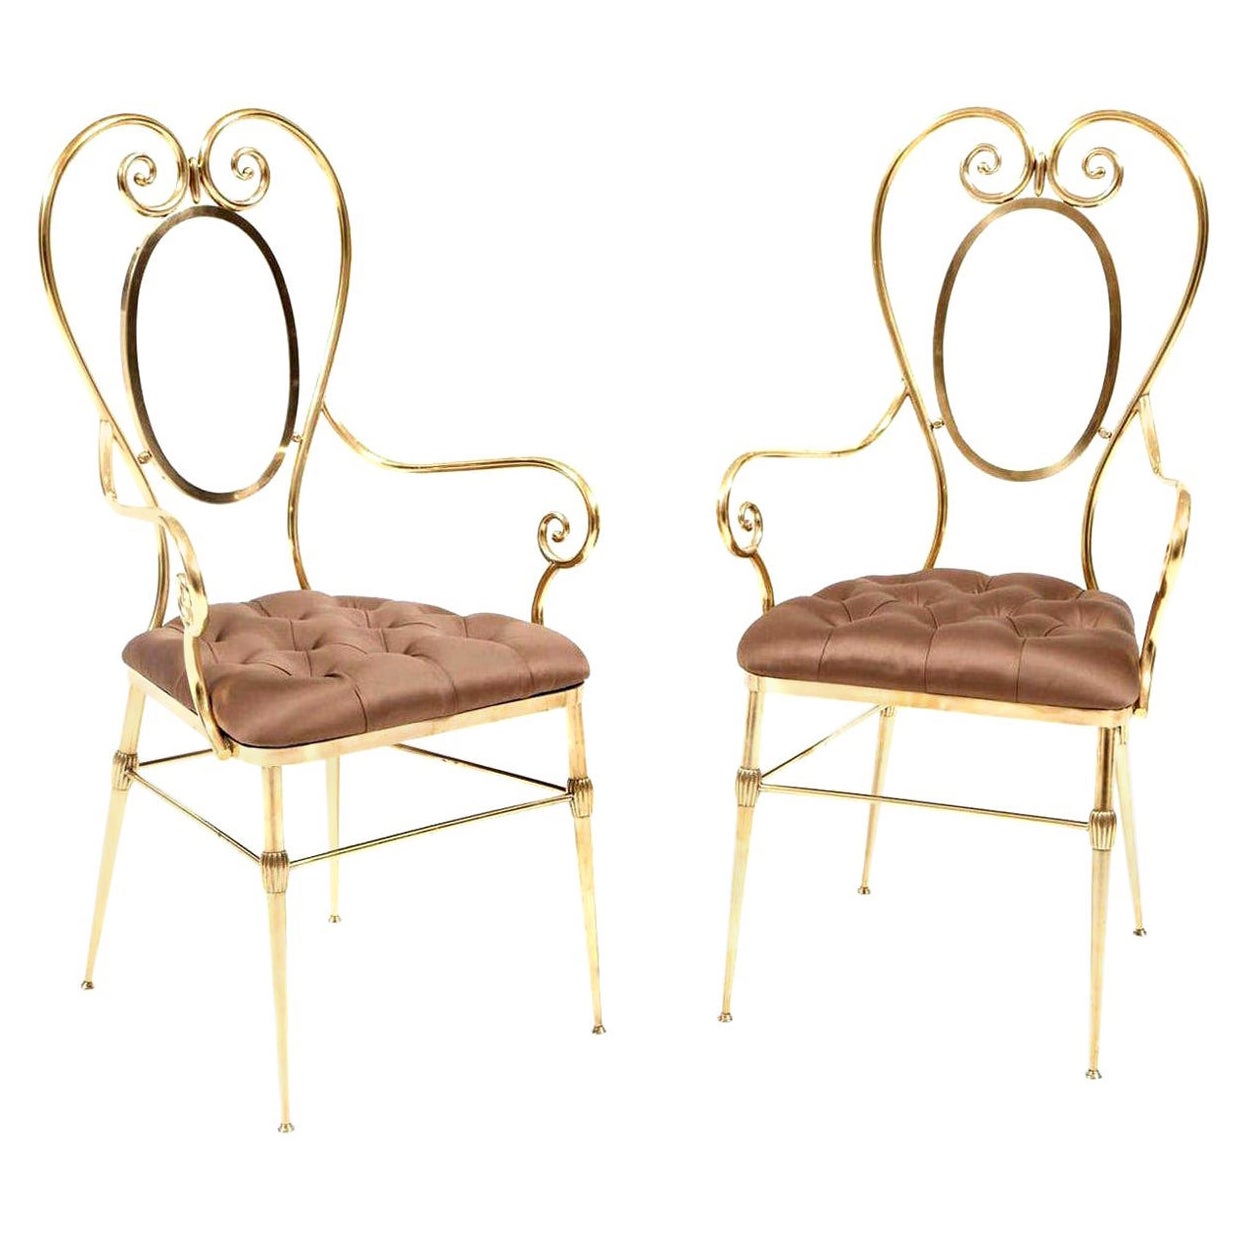 Chairs, Pair of Brass Chairs with Silk Upholstery,  Midcentury Design, C 1950 For Sale